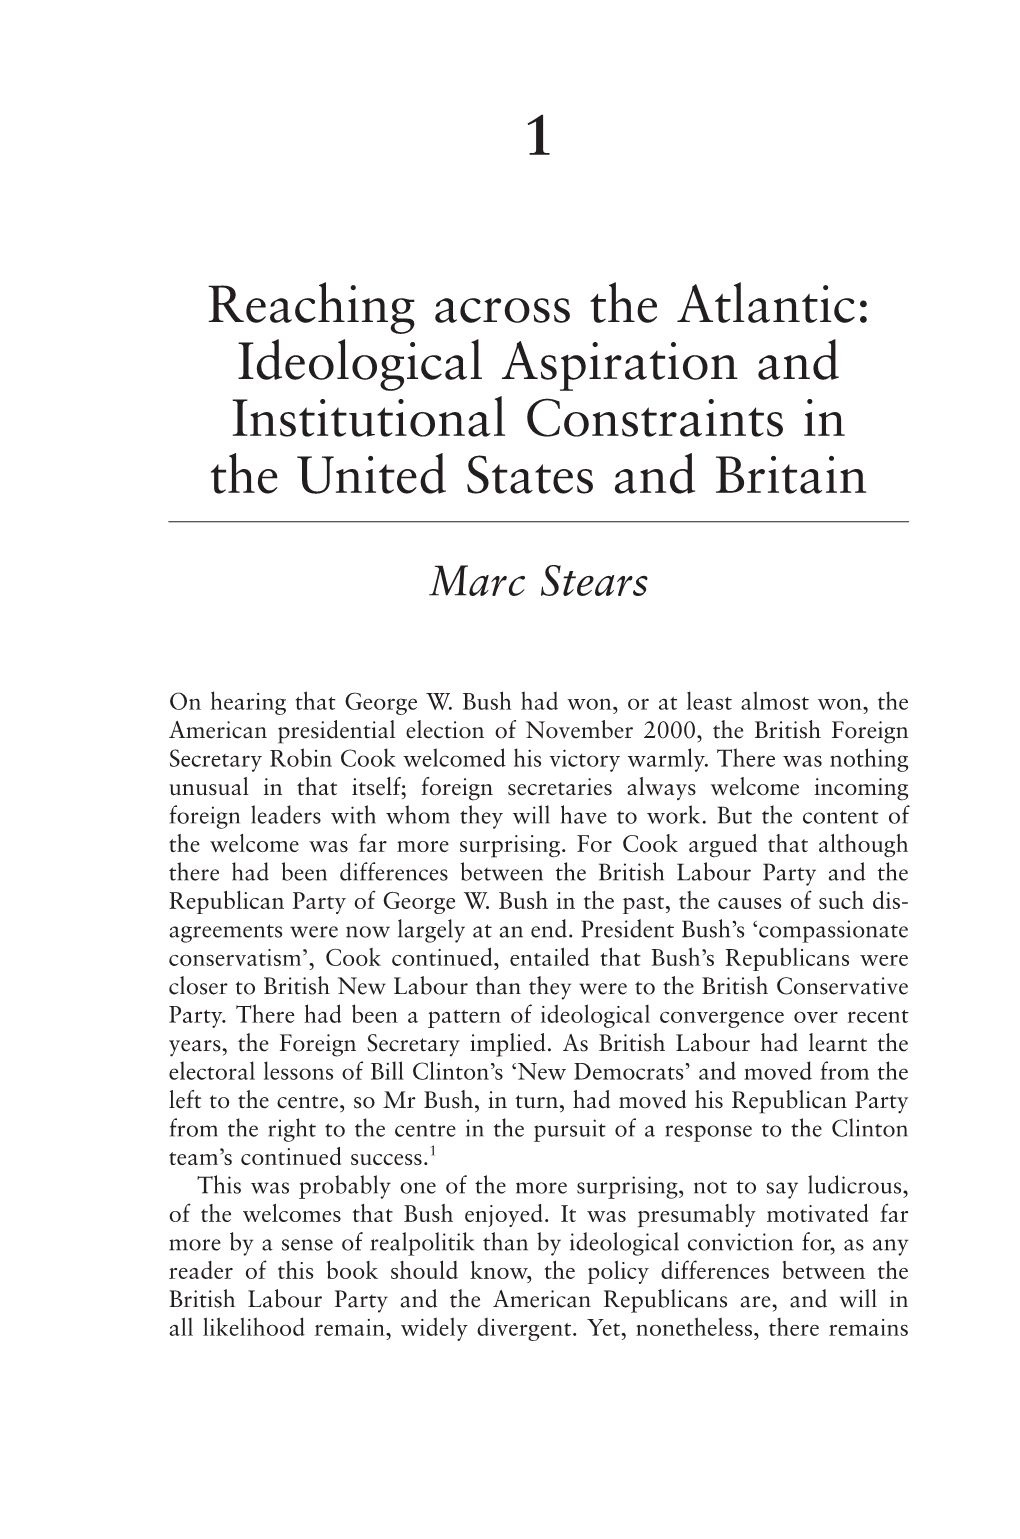 Ideological Aspiration and Institutional Constraints in the United States and Britain